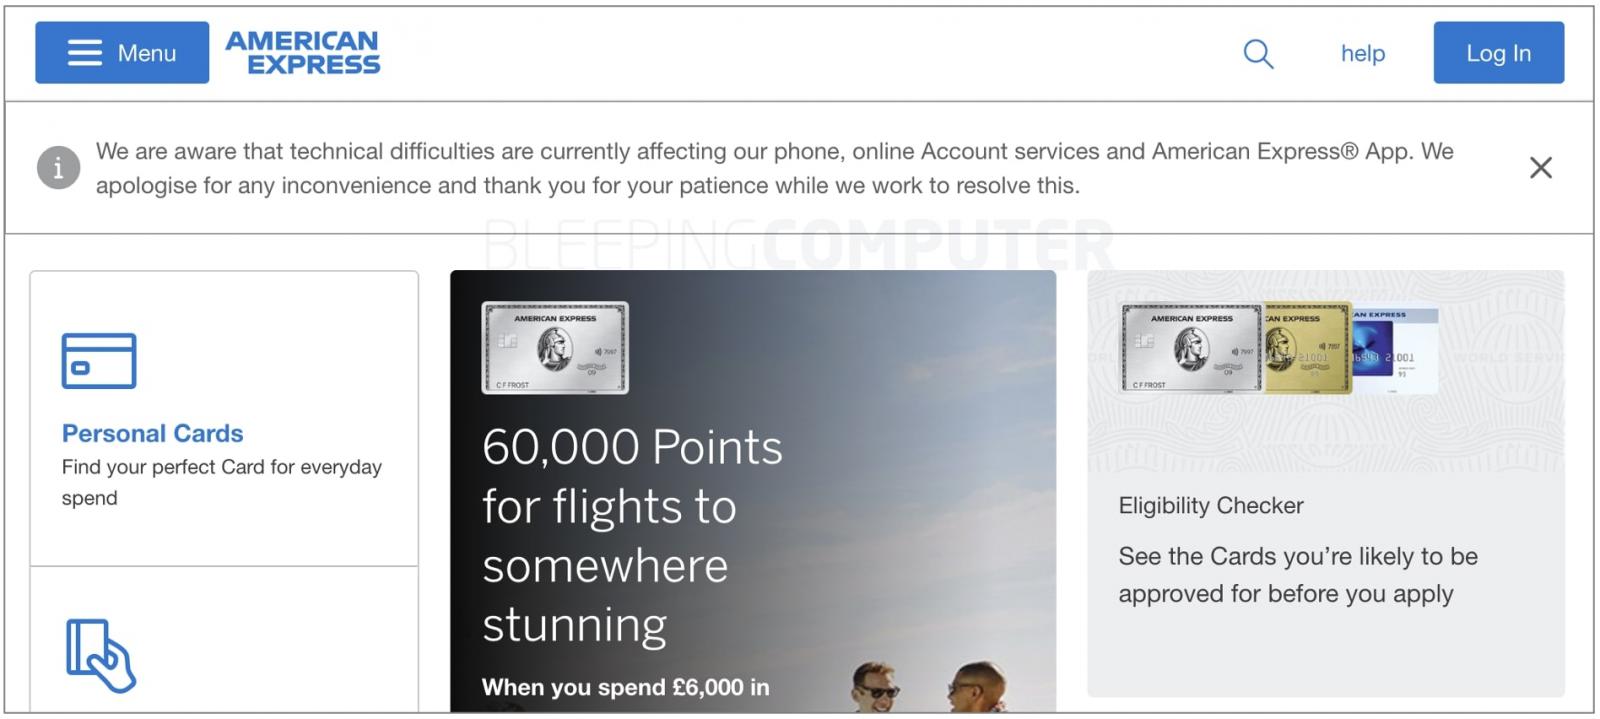 Amex announced on its homepage it was experiencing issues